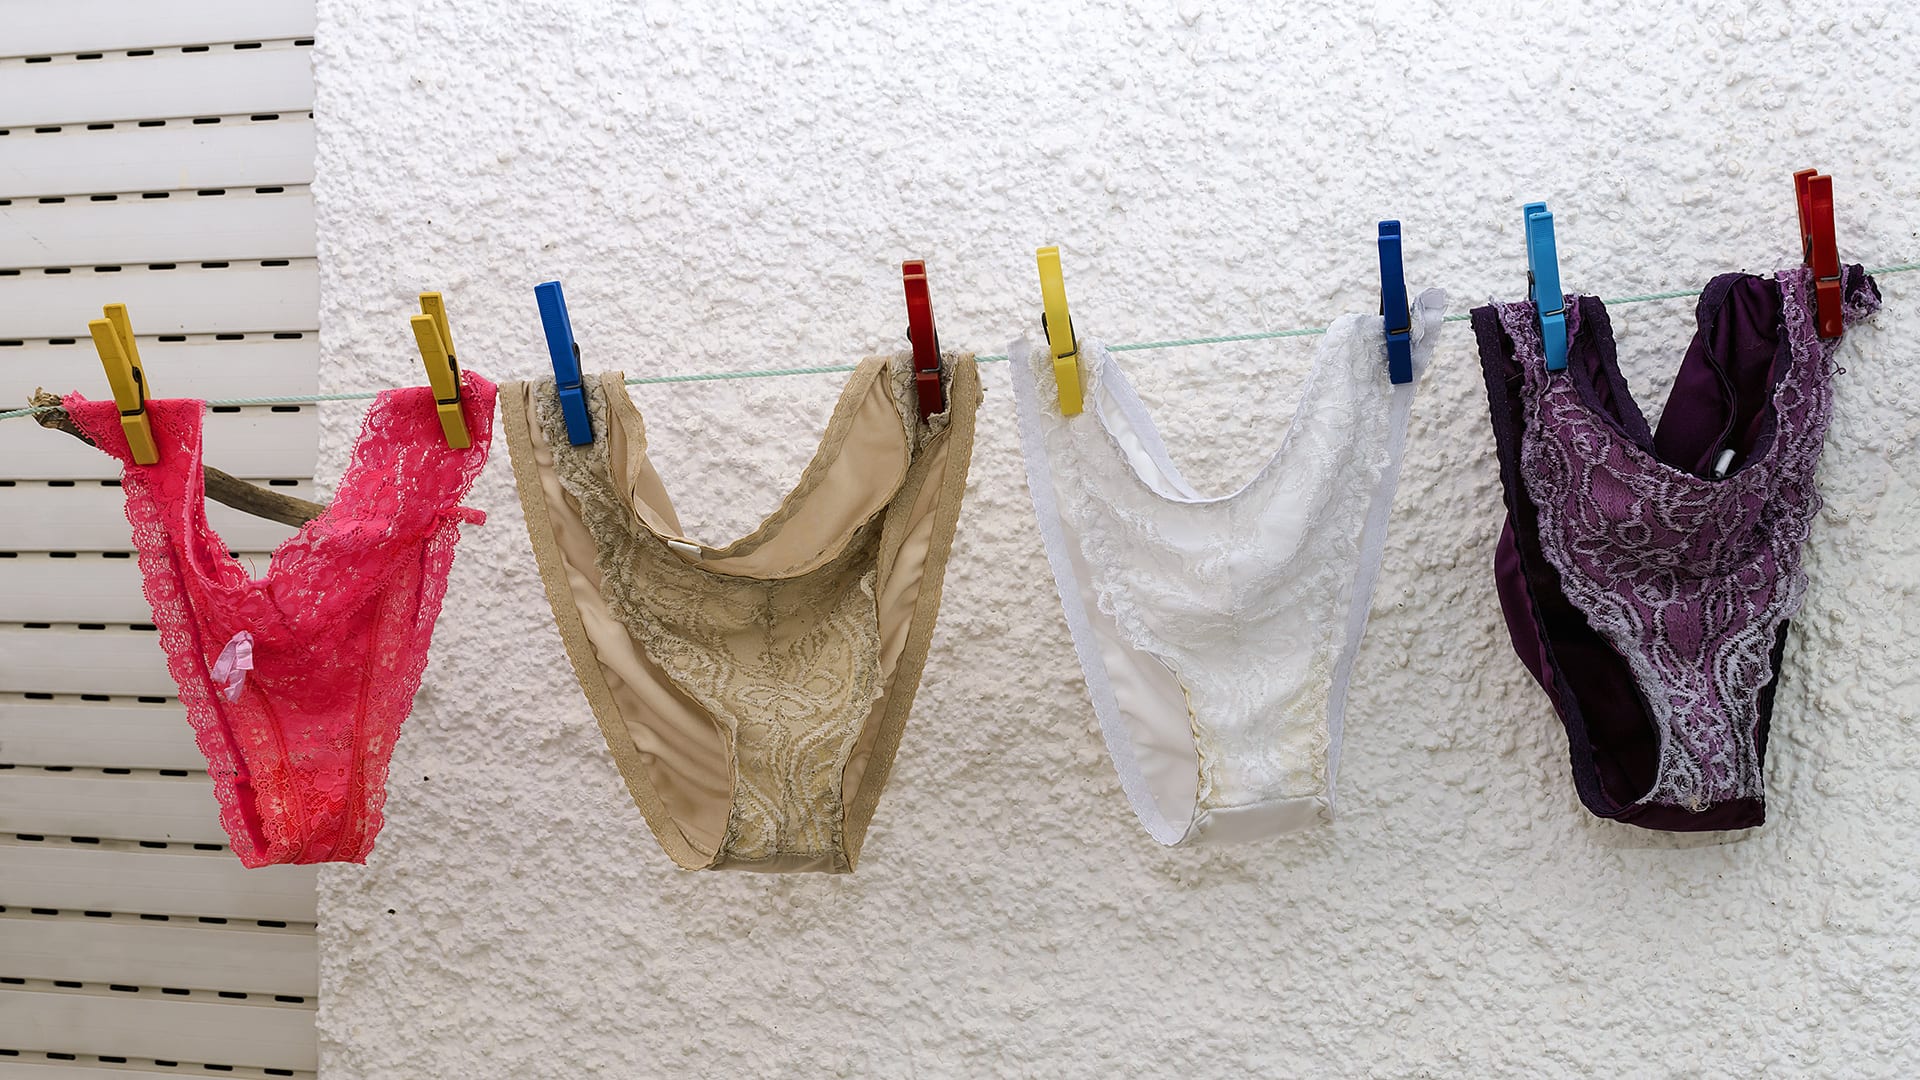 In much of Latin America, wearing colored underwear on New Year’s Eve will ...